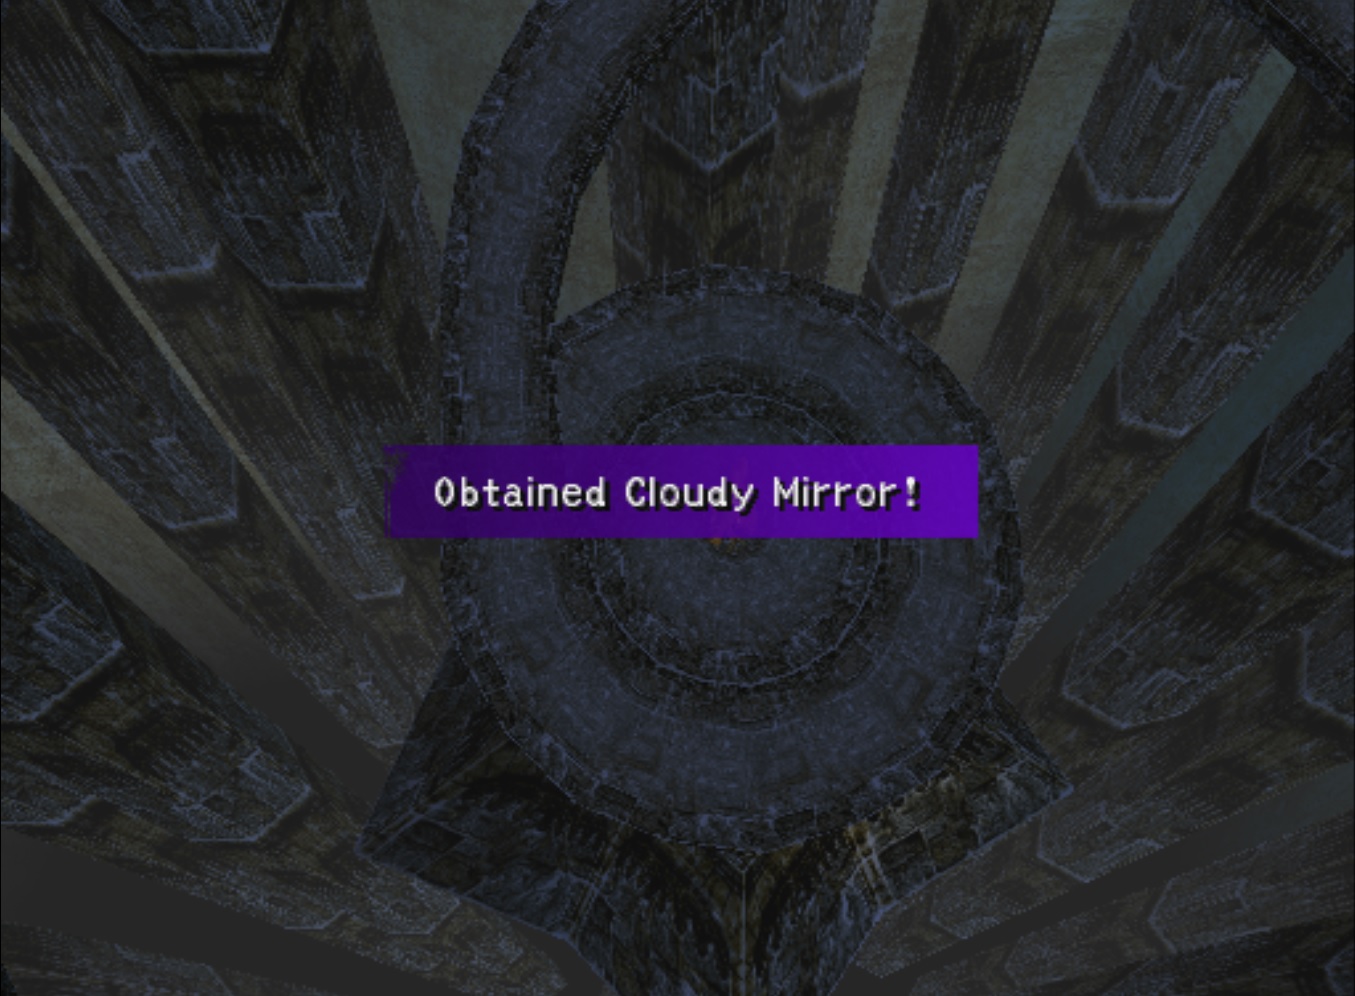 Cloudy Mirror Obtained